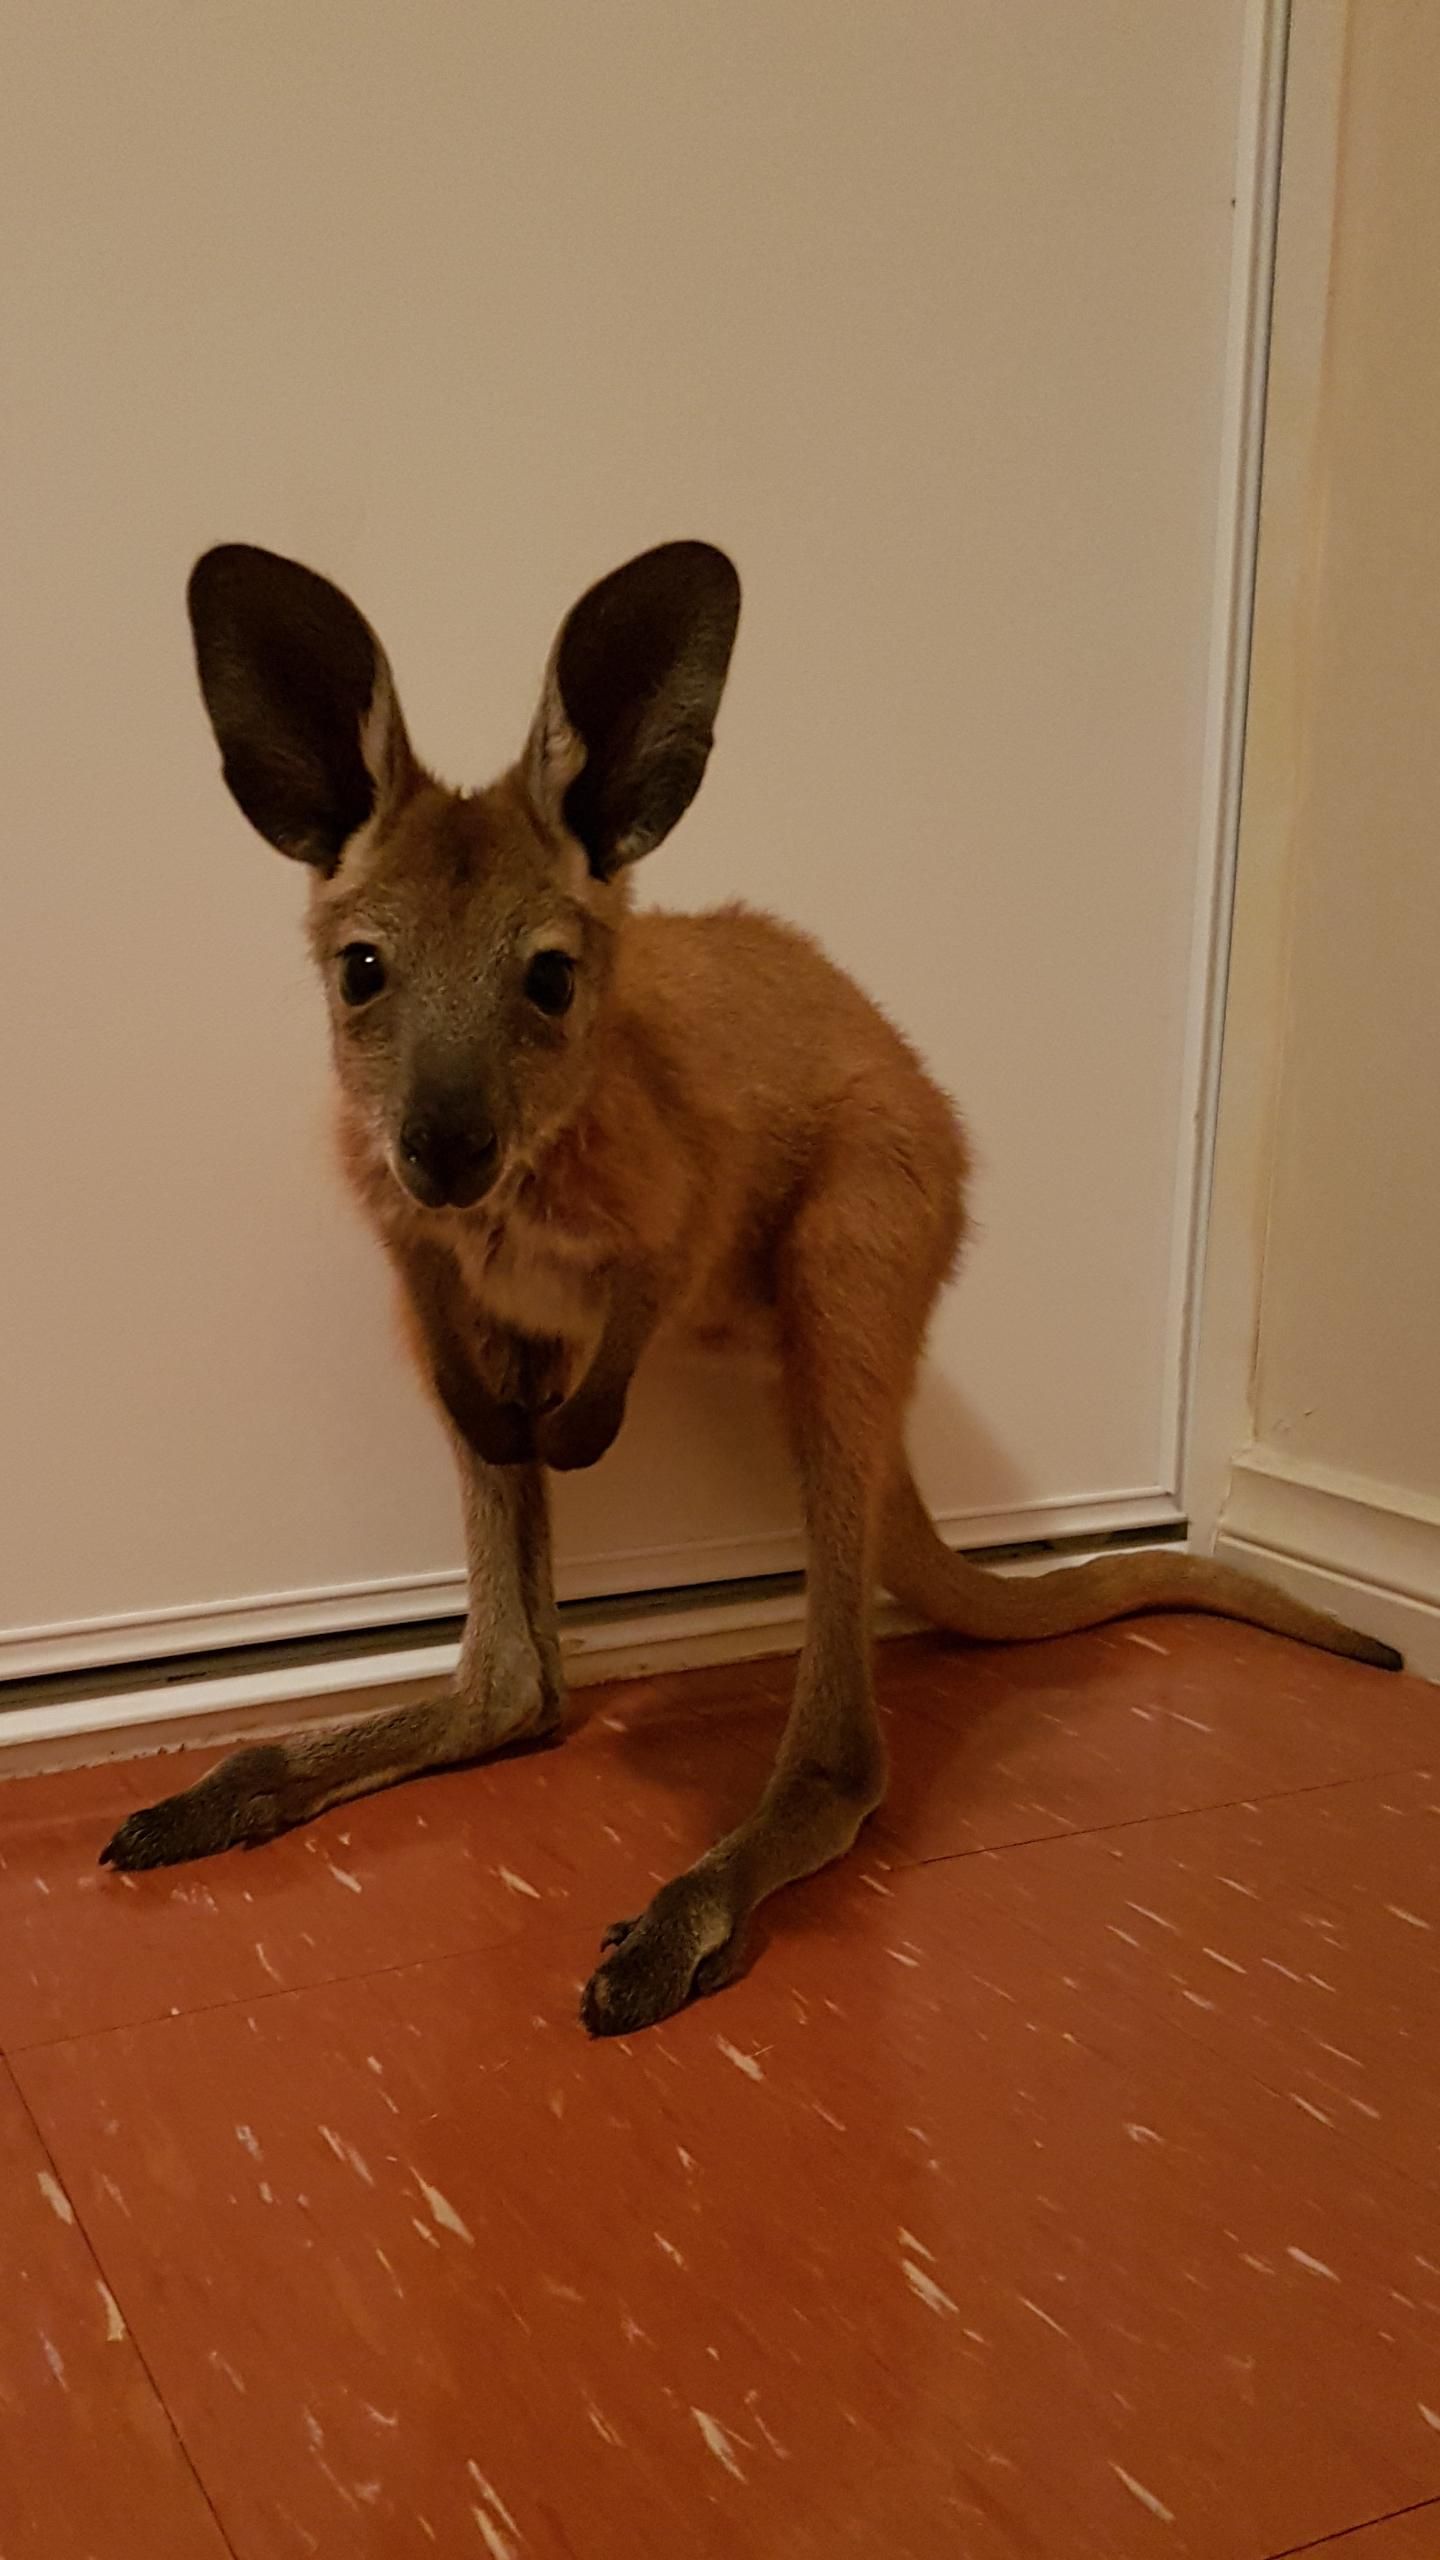 Meet Ruby the baby Roo joey. We have adopted her until she's ready to be released back into the wild. Rubythebabyroo